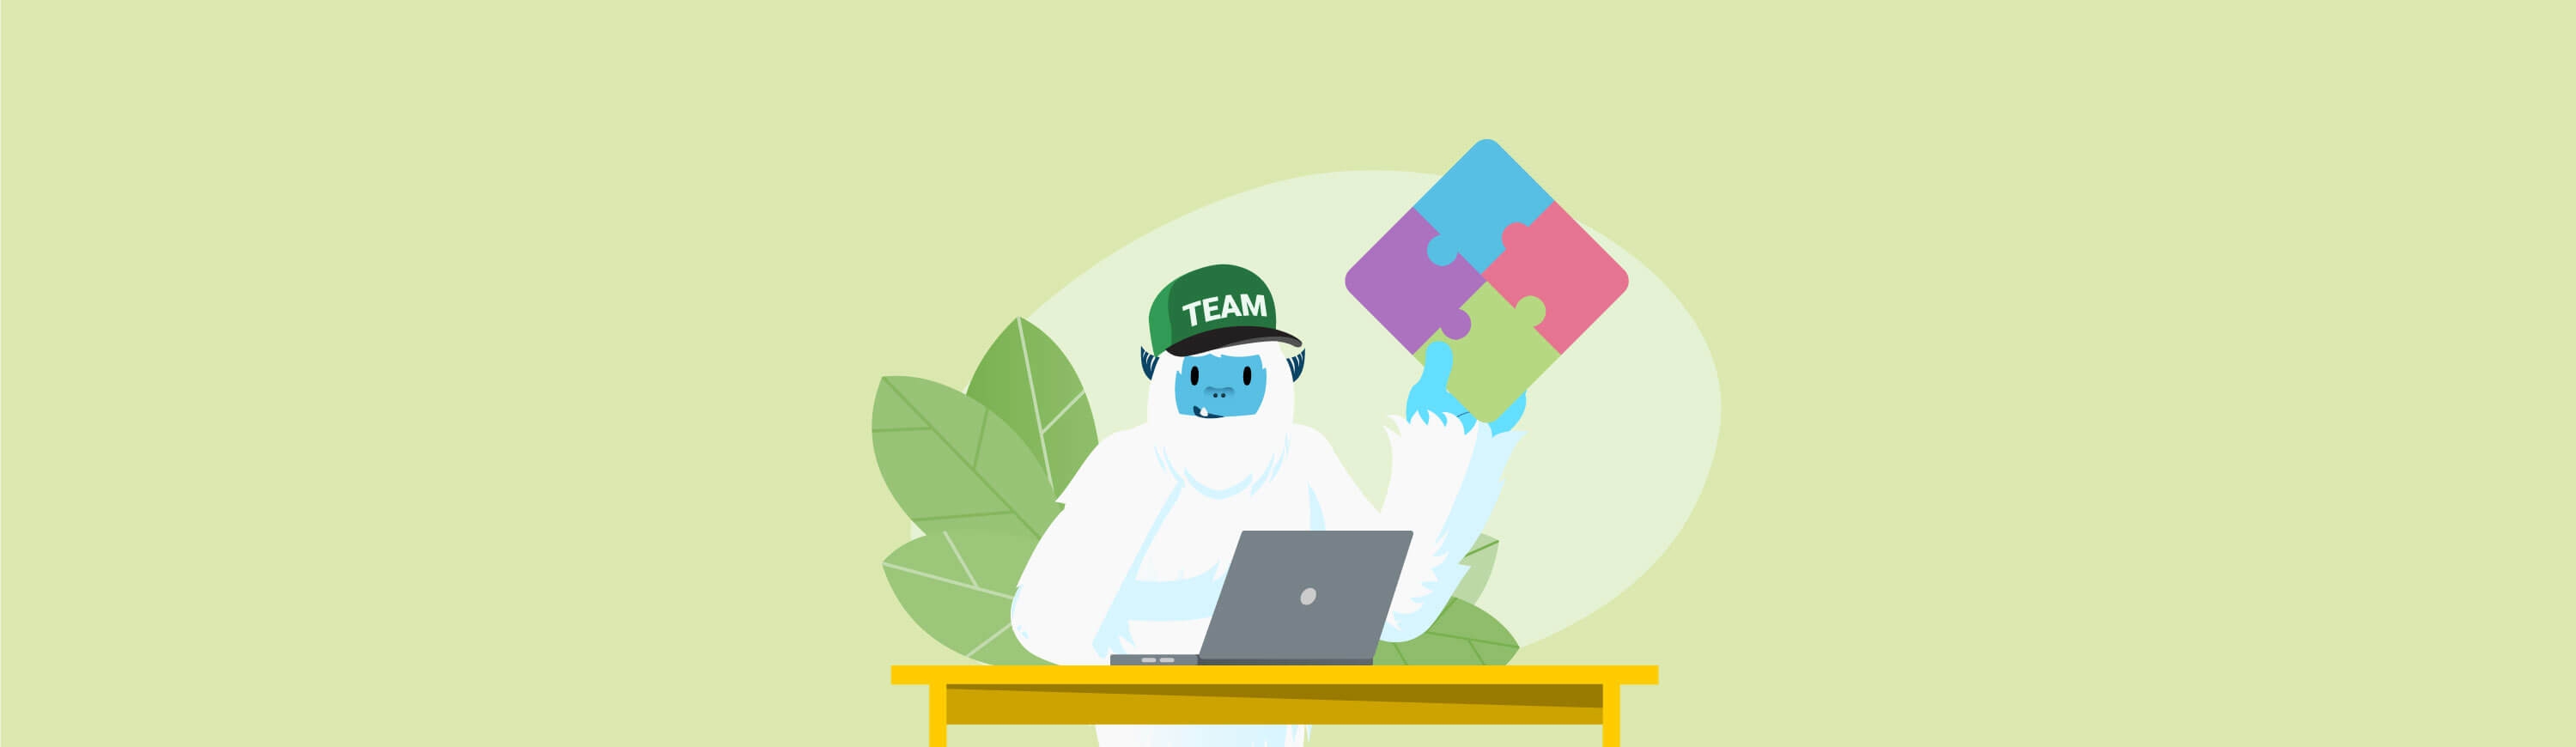 Illustration of Carl the yeti holding a puzzle piece with a hat that says Team on it.